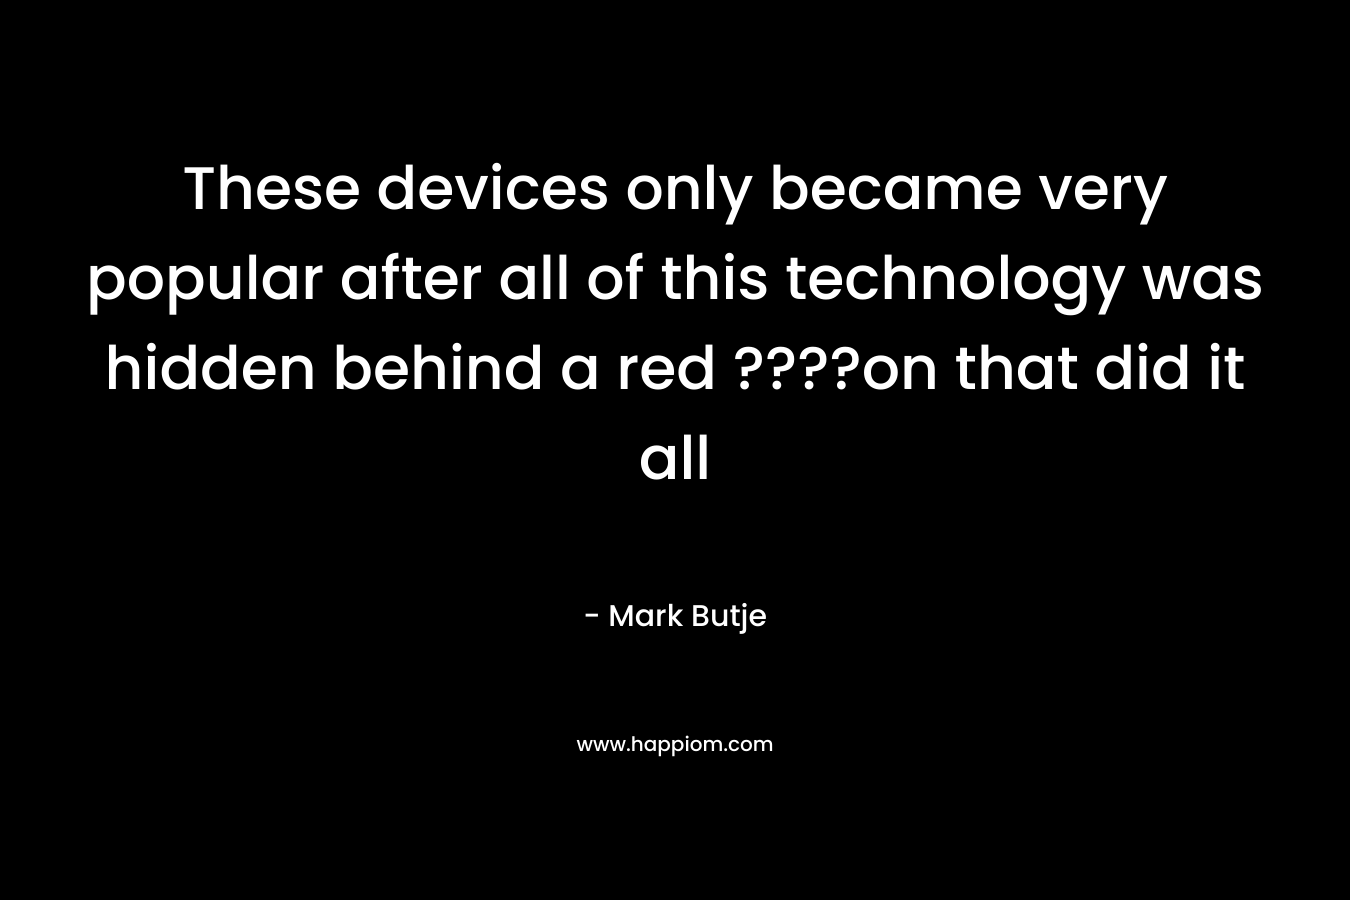 These devices only became very popular after all of this technology was hidden behind a red ????on that did it all – Mark Butje